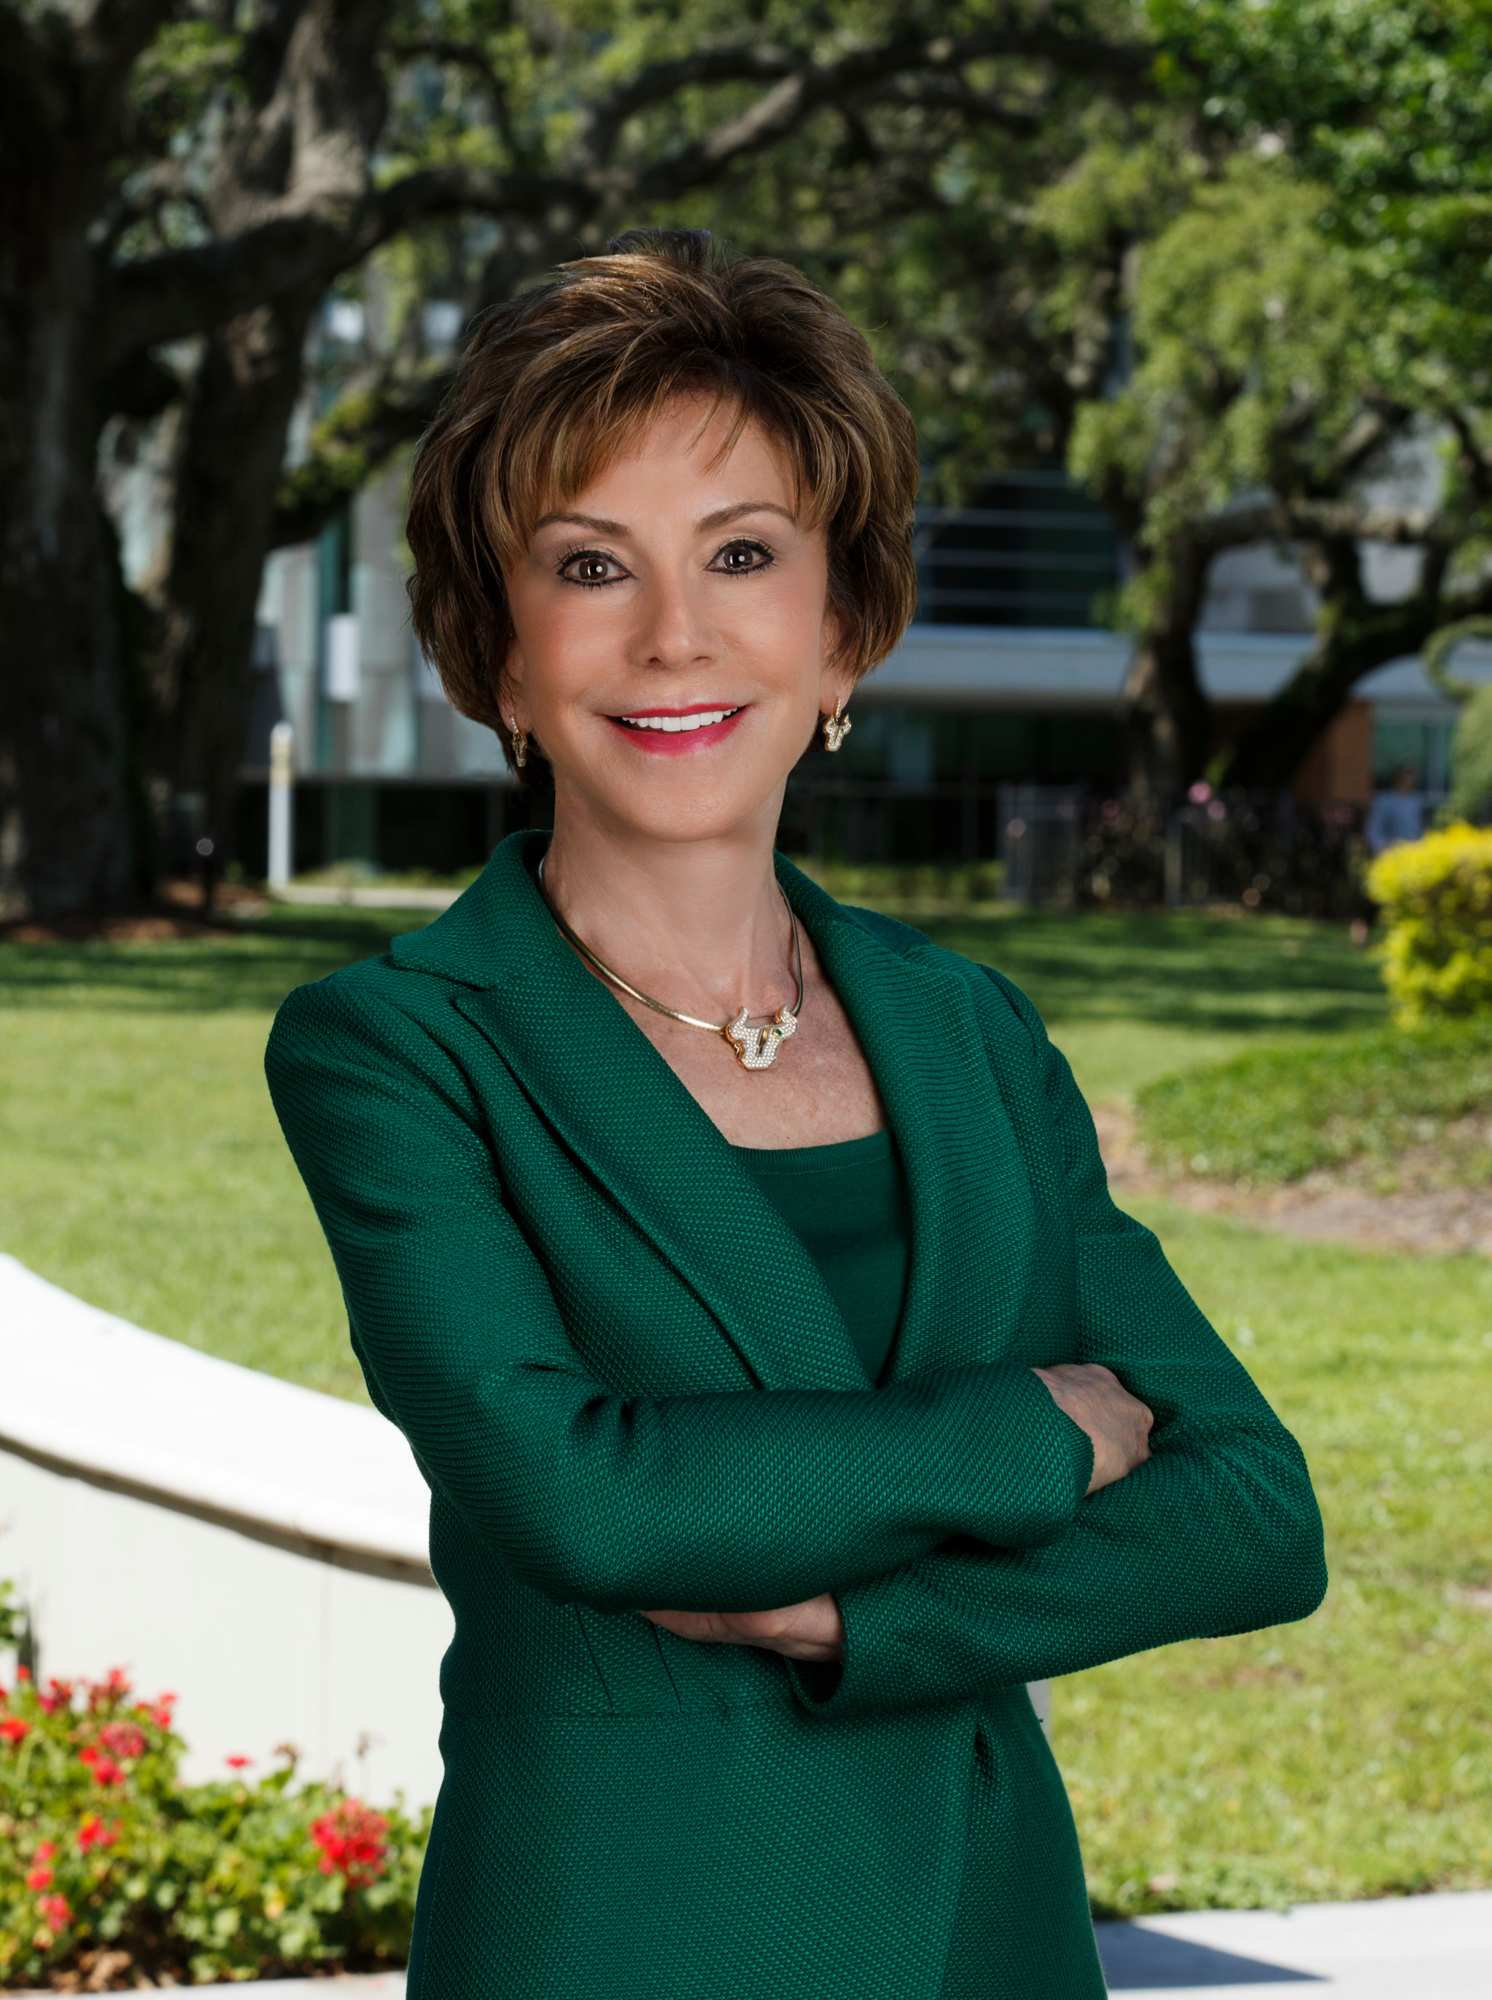 USF System President Judy Genshaft will unveil the university's new branding in September. Courtesy photo.